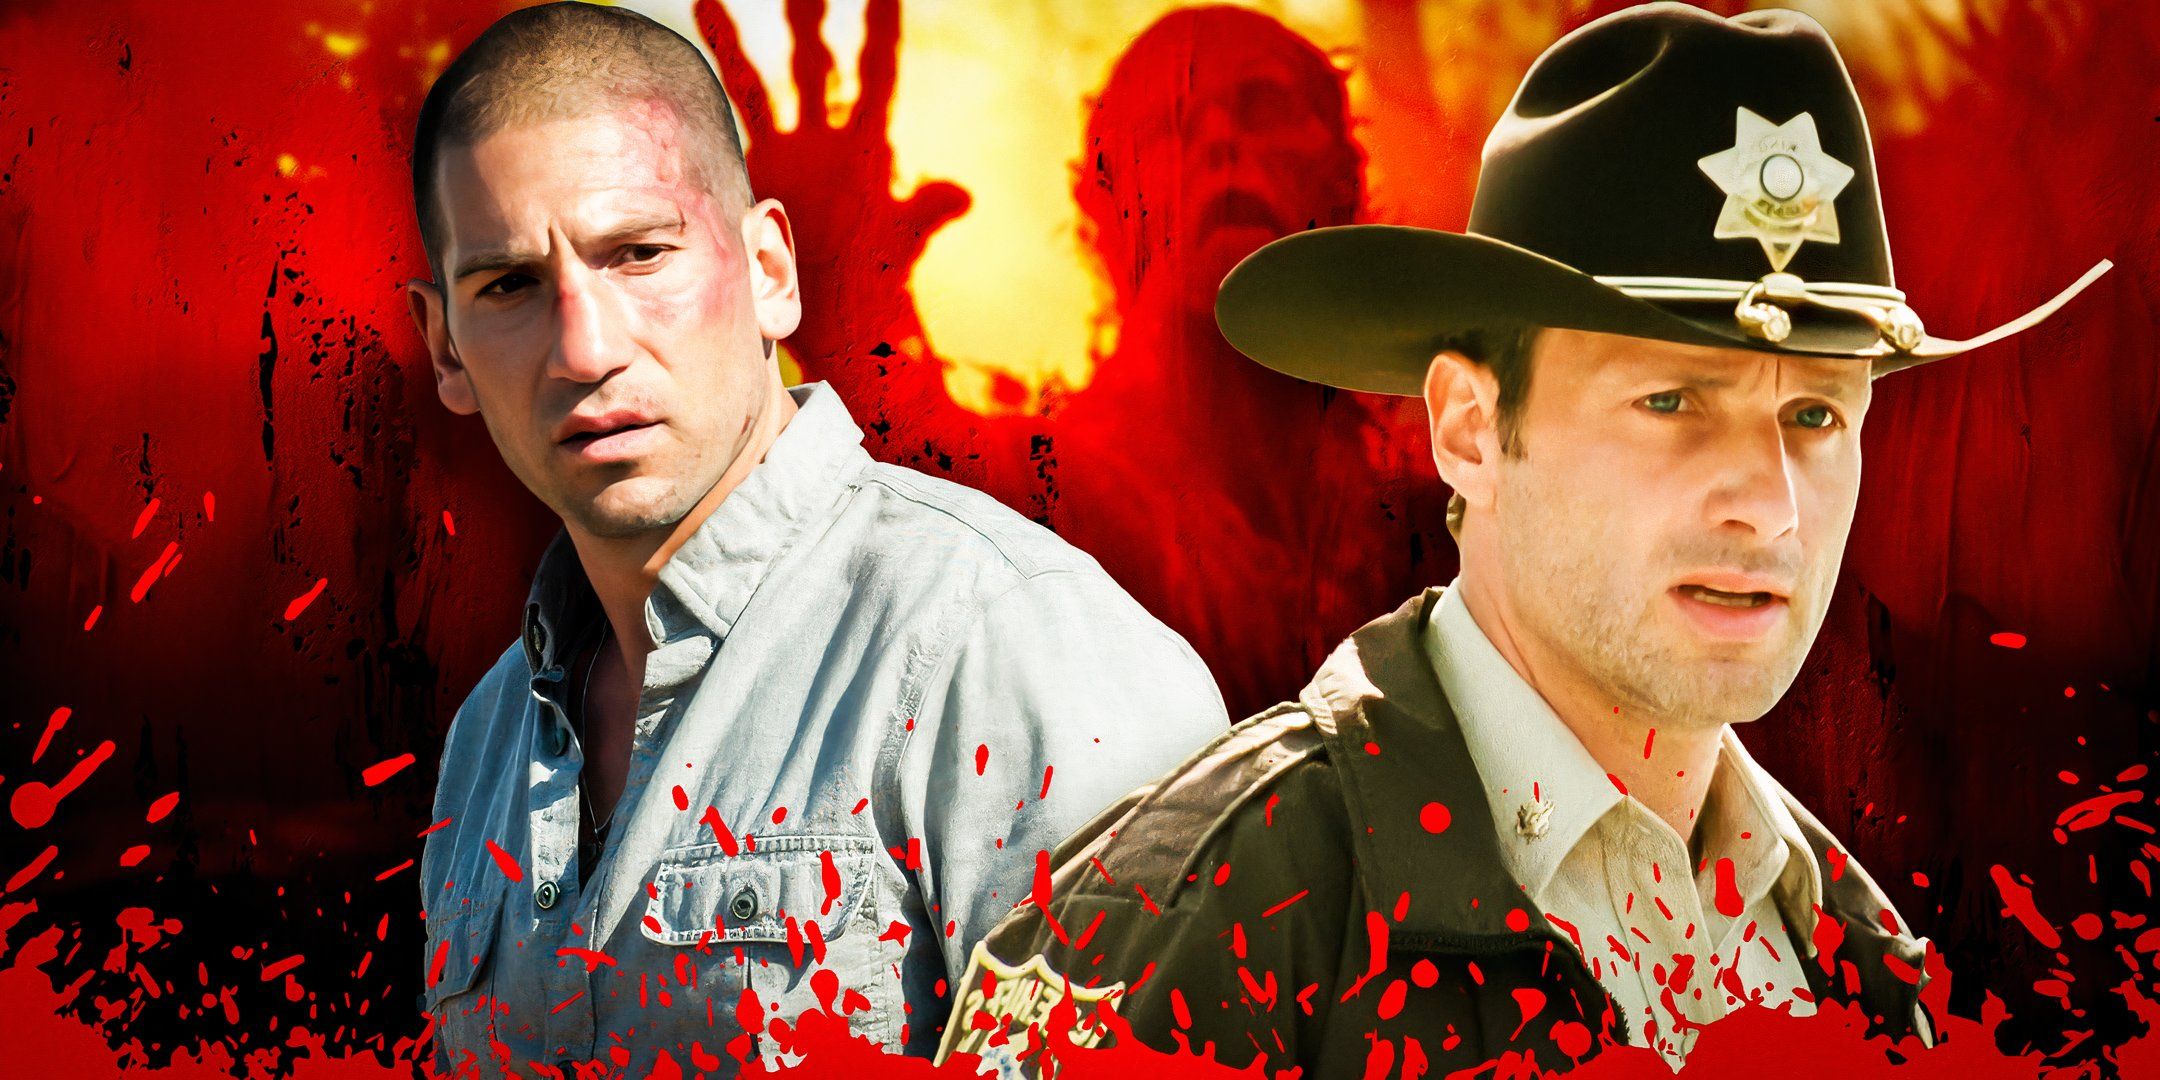 Jon Bernthal as Shane Walsh and Andrew Lincoln as Rick Grimes surrounded by blood in The Walking Dead